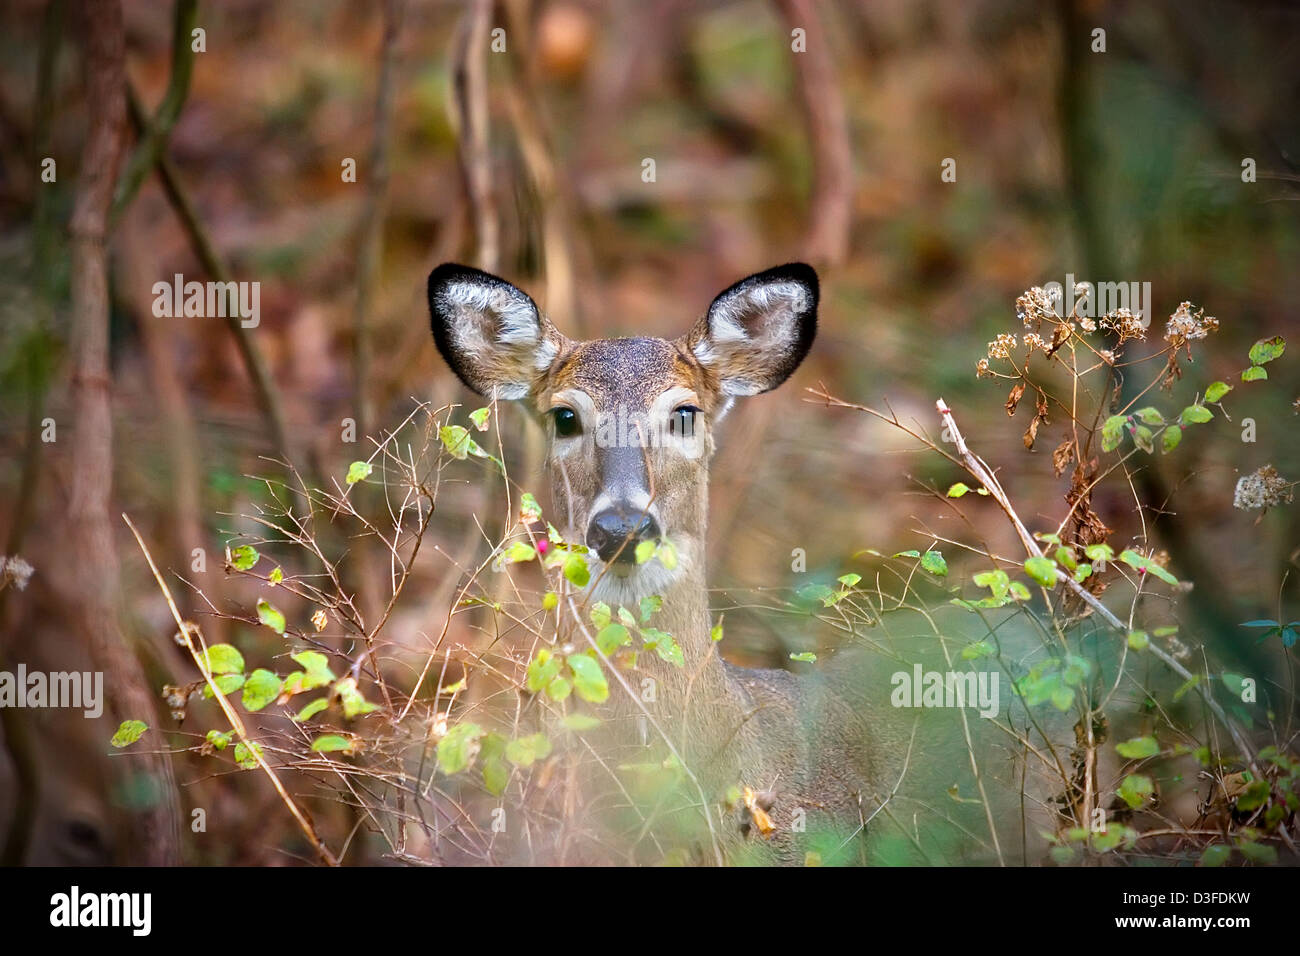 A young deer hides behind brush looking towards the camera Stock Photo